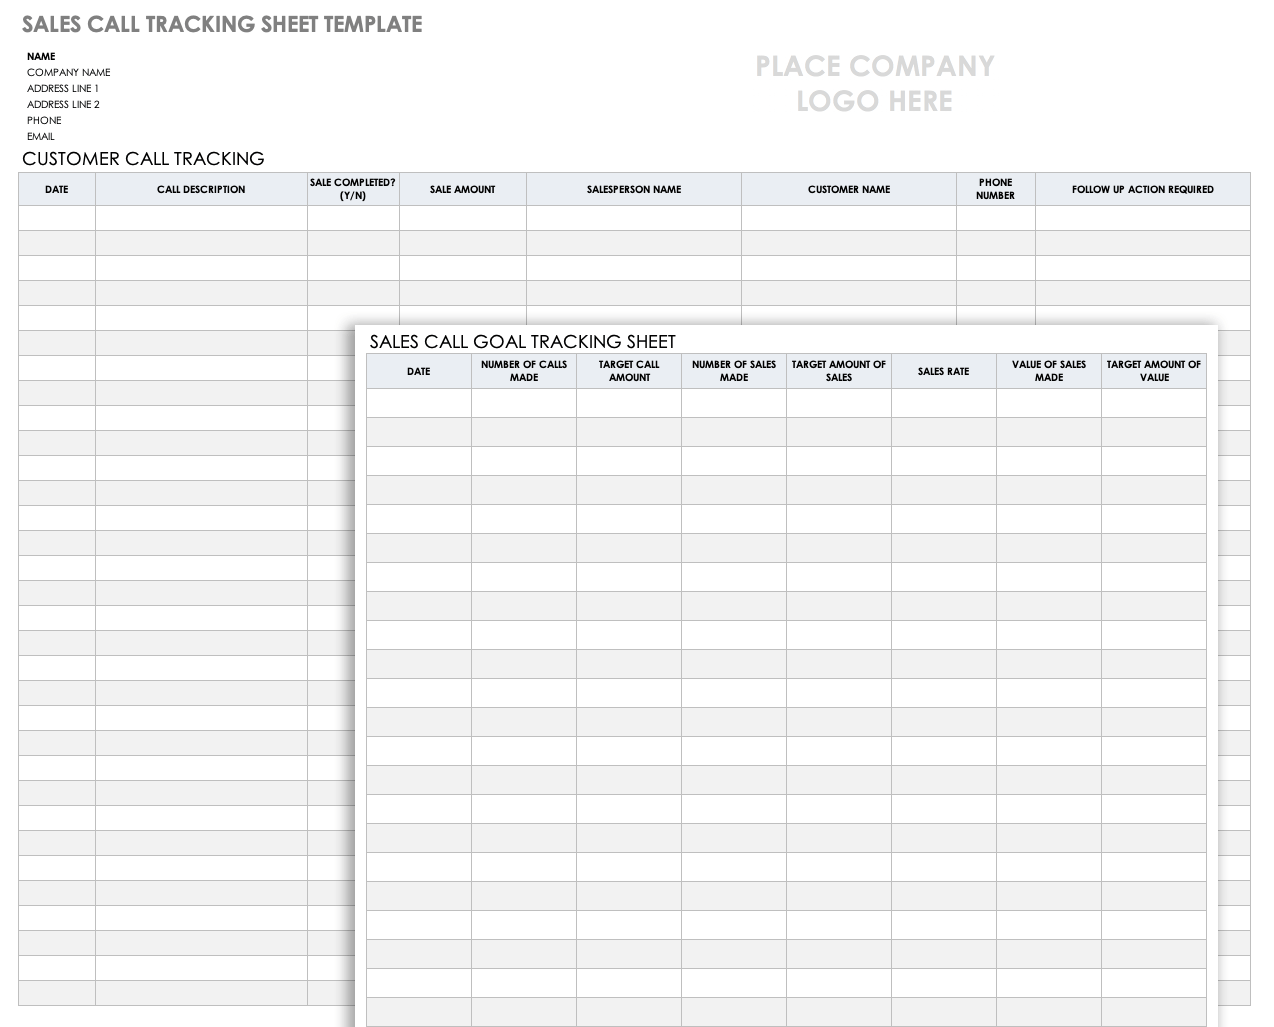 Sales Call Tracking Sheet Template